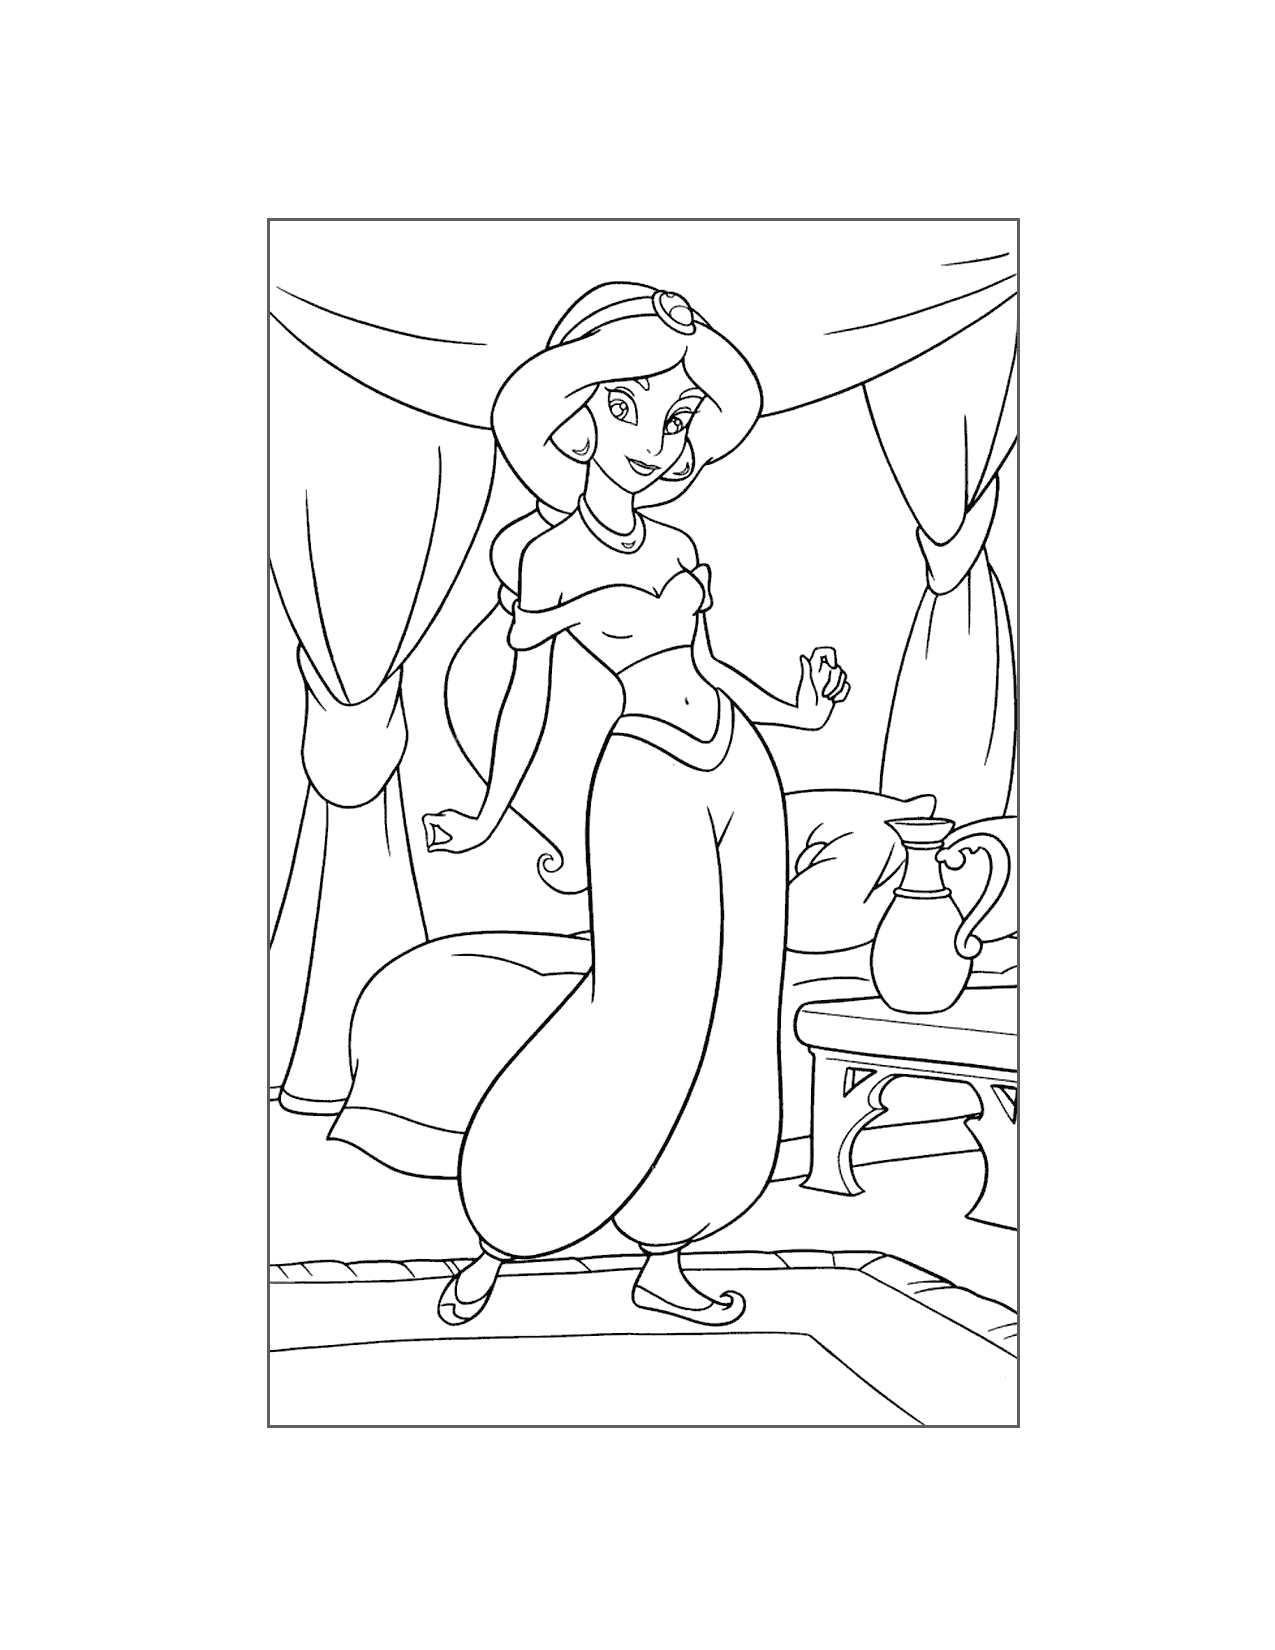 Princess Jasmine In The Palace Coloring Page